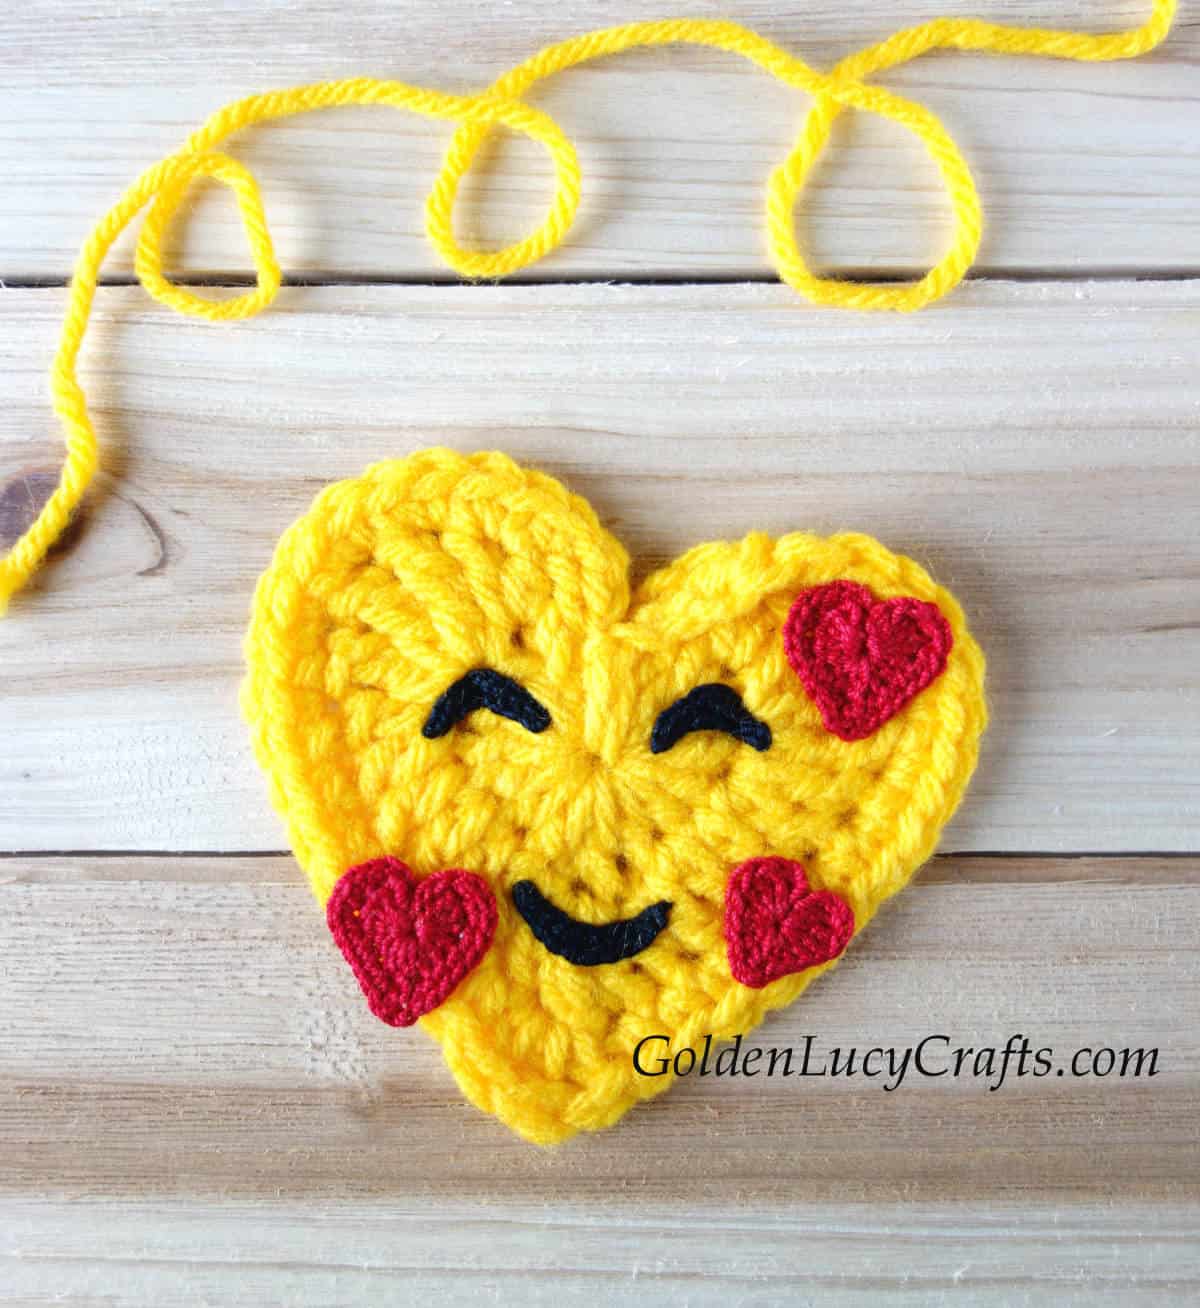 Crochet heart emoji smiling face with hearts.